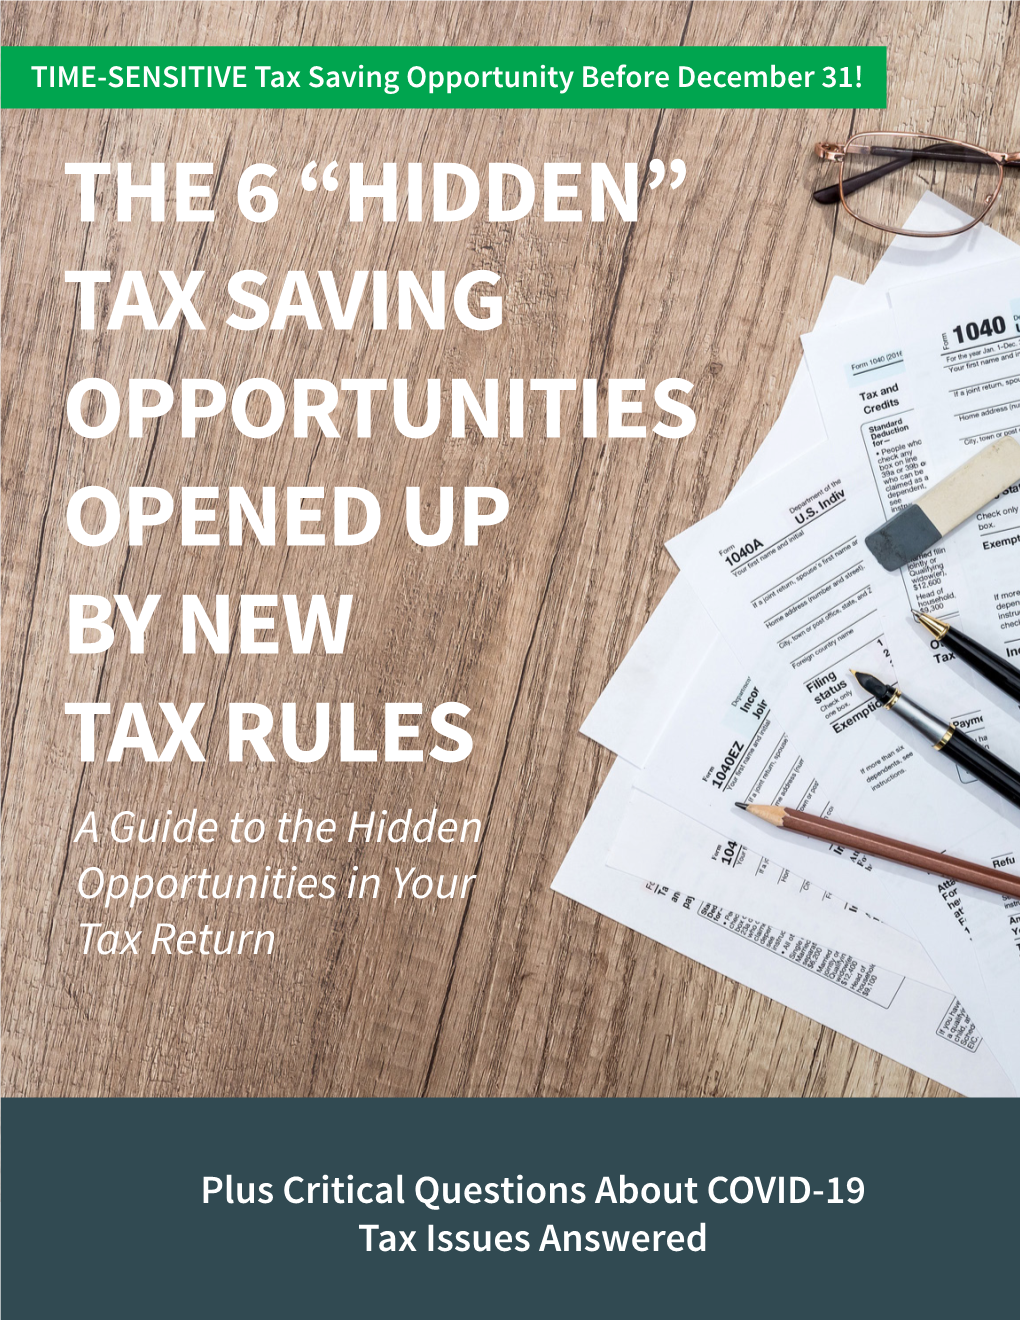 THE 6 “HIDDEN” TAX SAVING OPPORTUNITIES OPENED up by NEW TAX RULES a Guide to the Hidden Opportunities in Your Tax Return